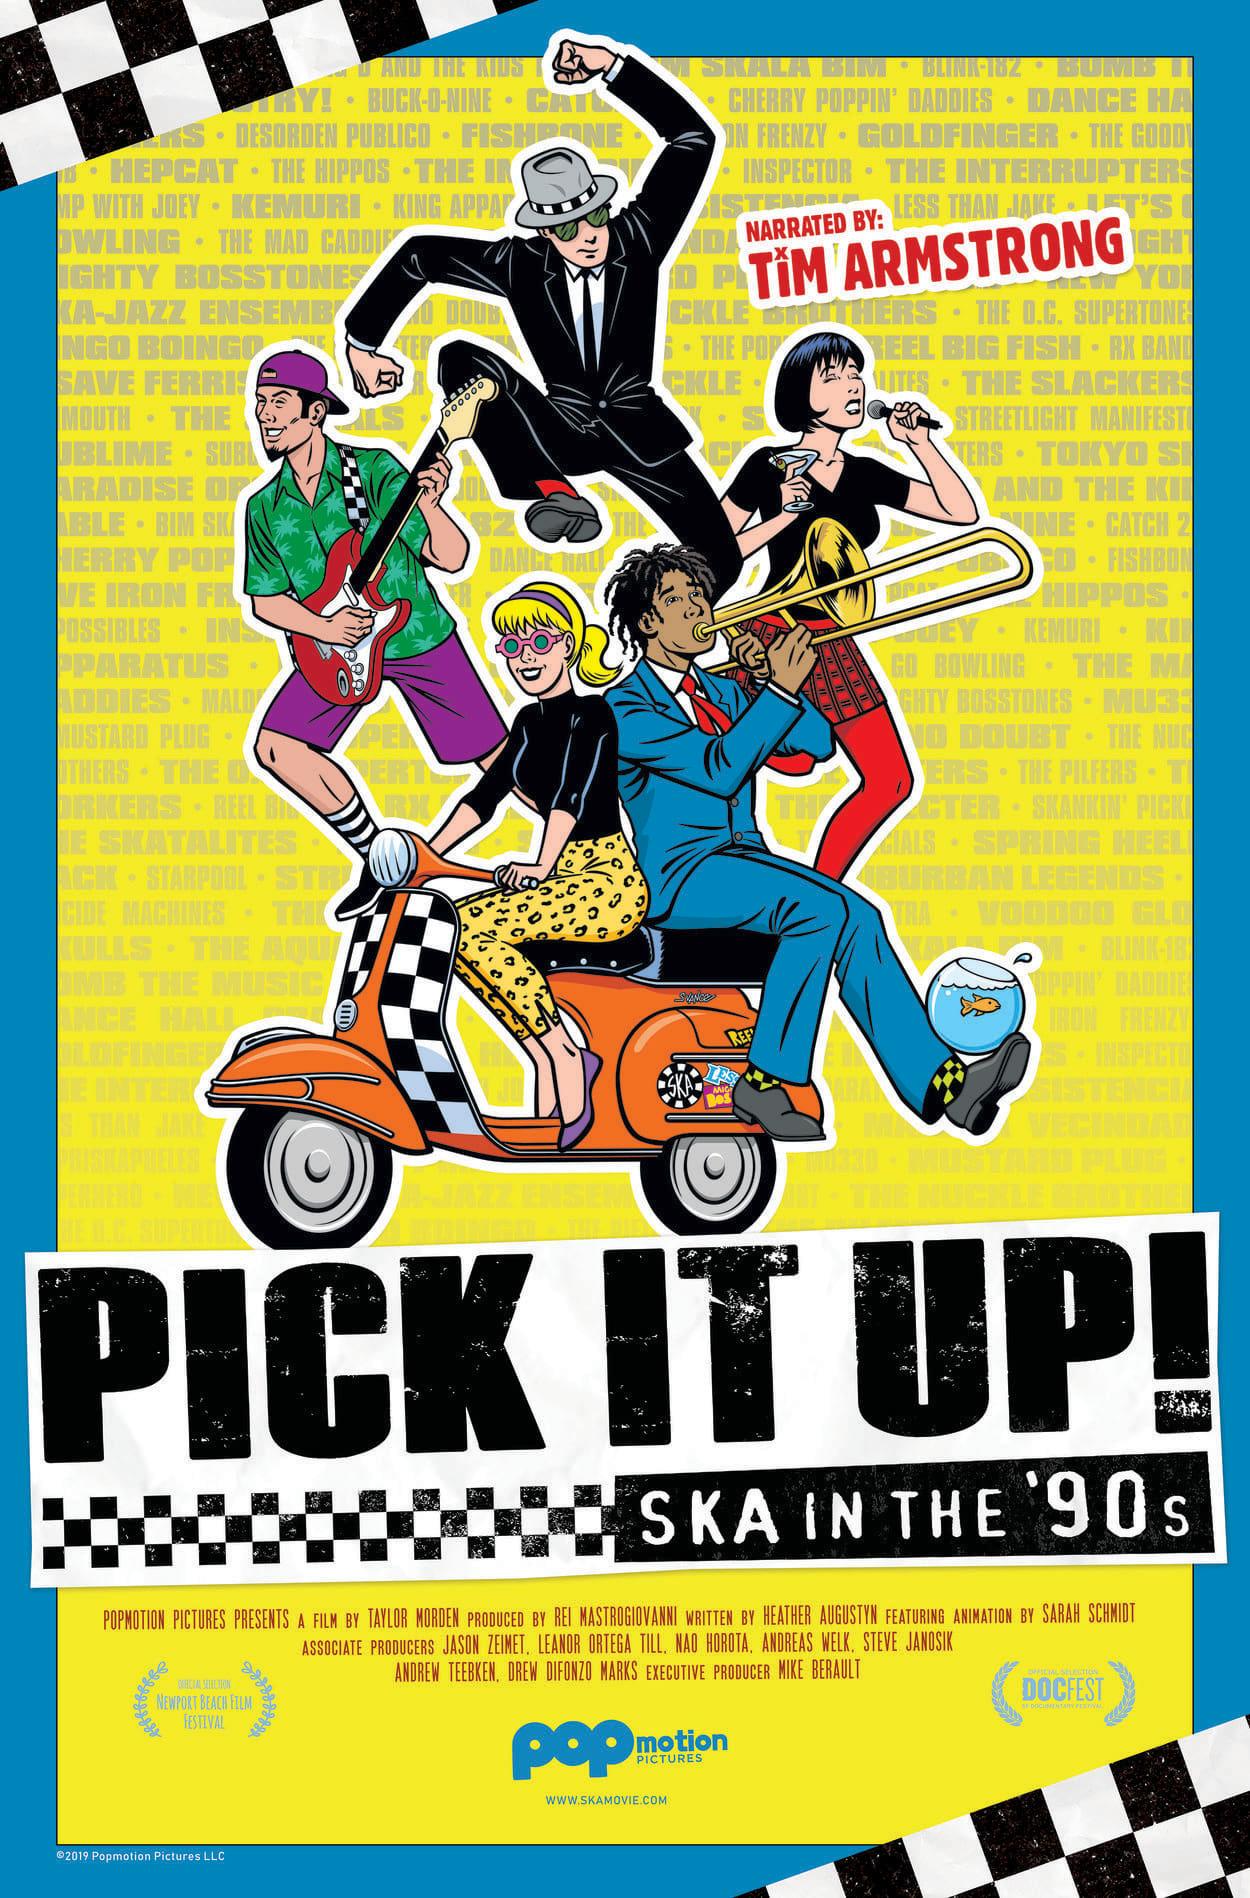 Pick It Up!: Ska in the '90s poster